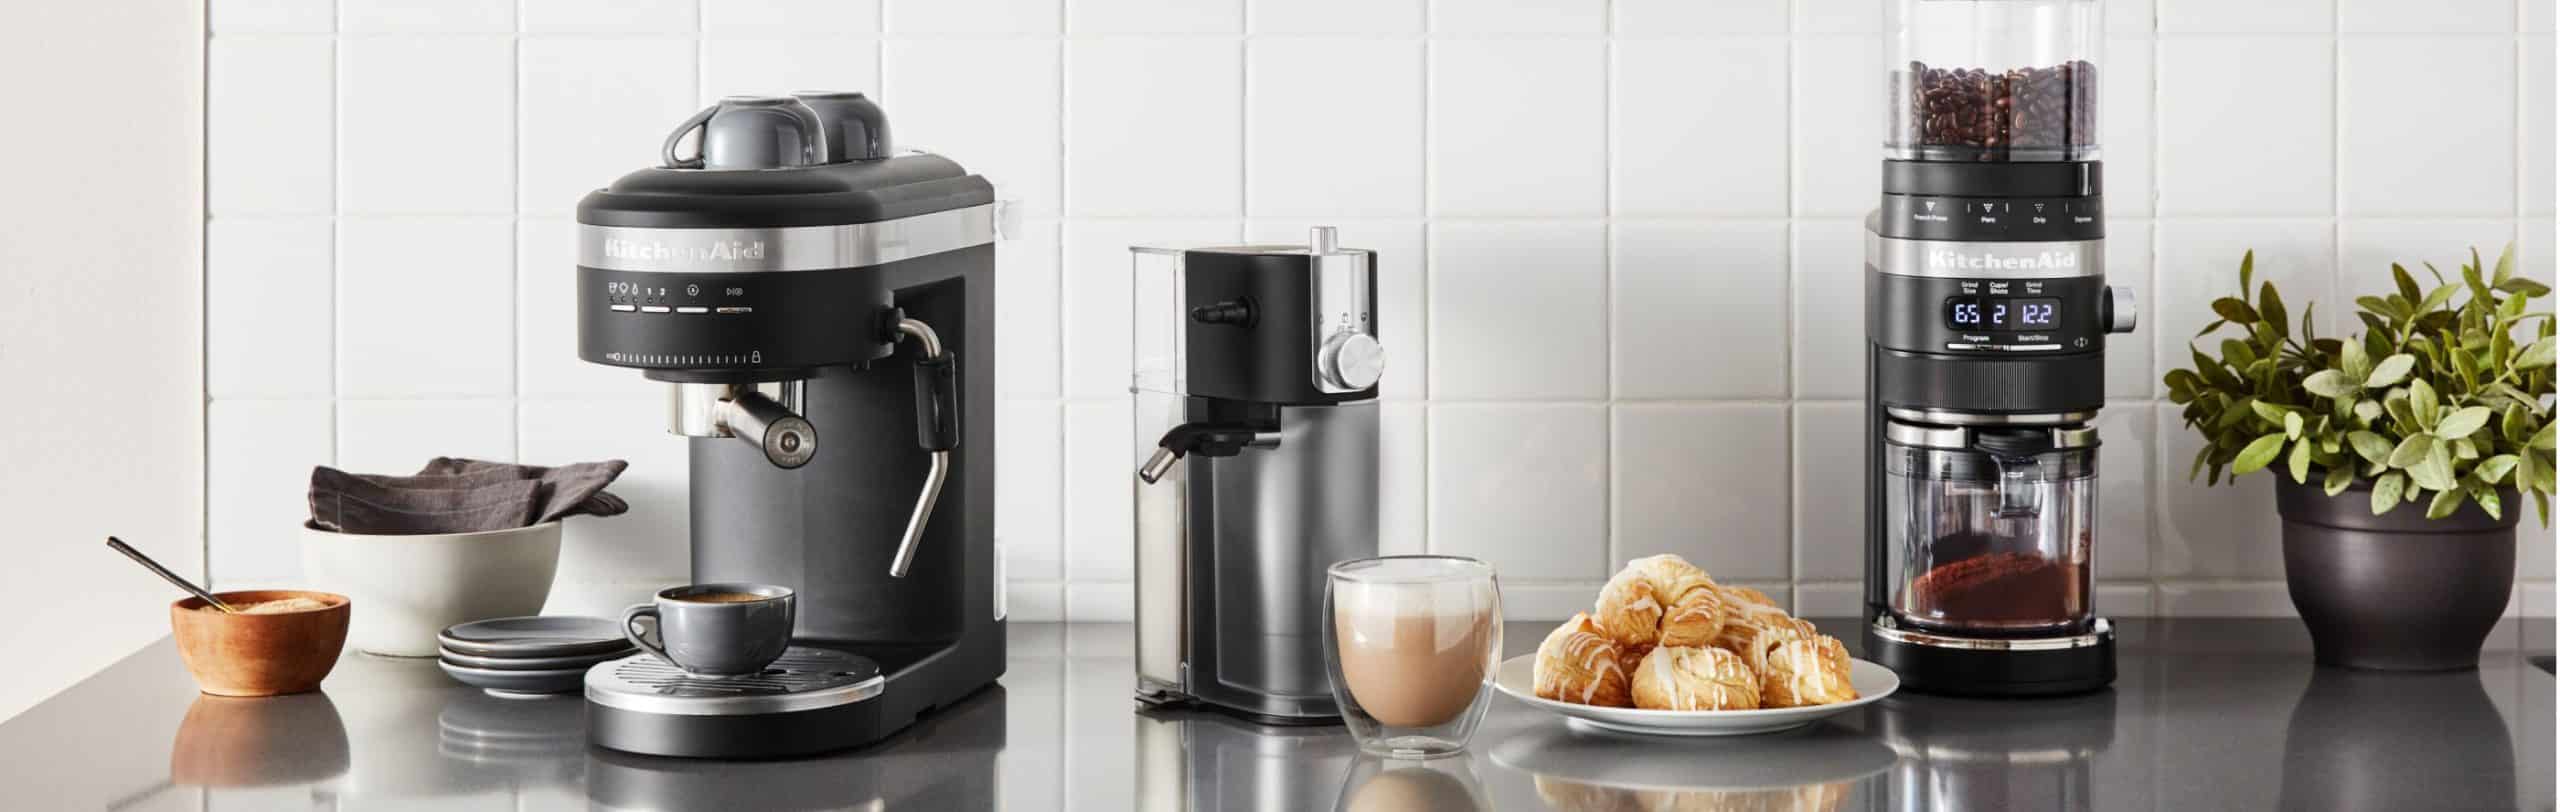 What Should You Look For When Buying A Coffee Maker?